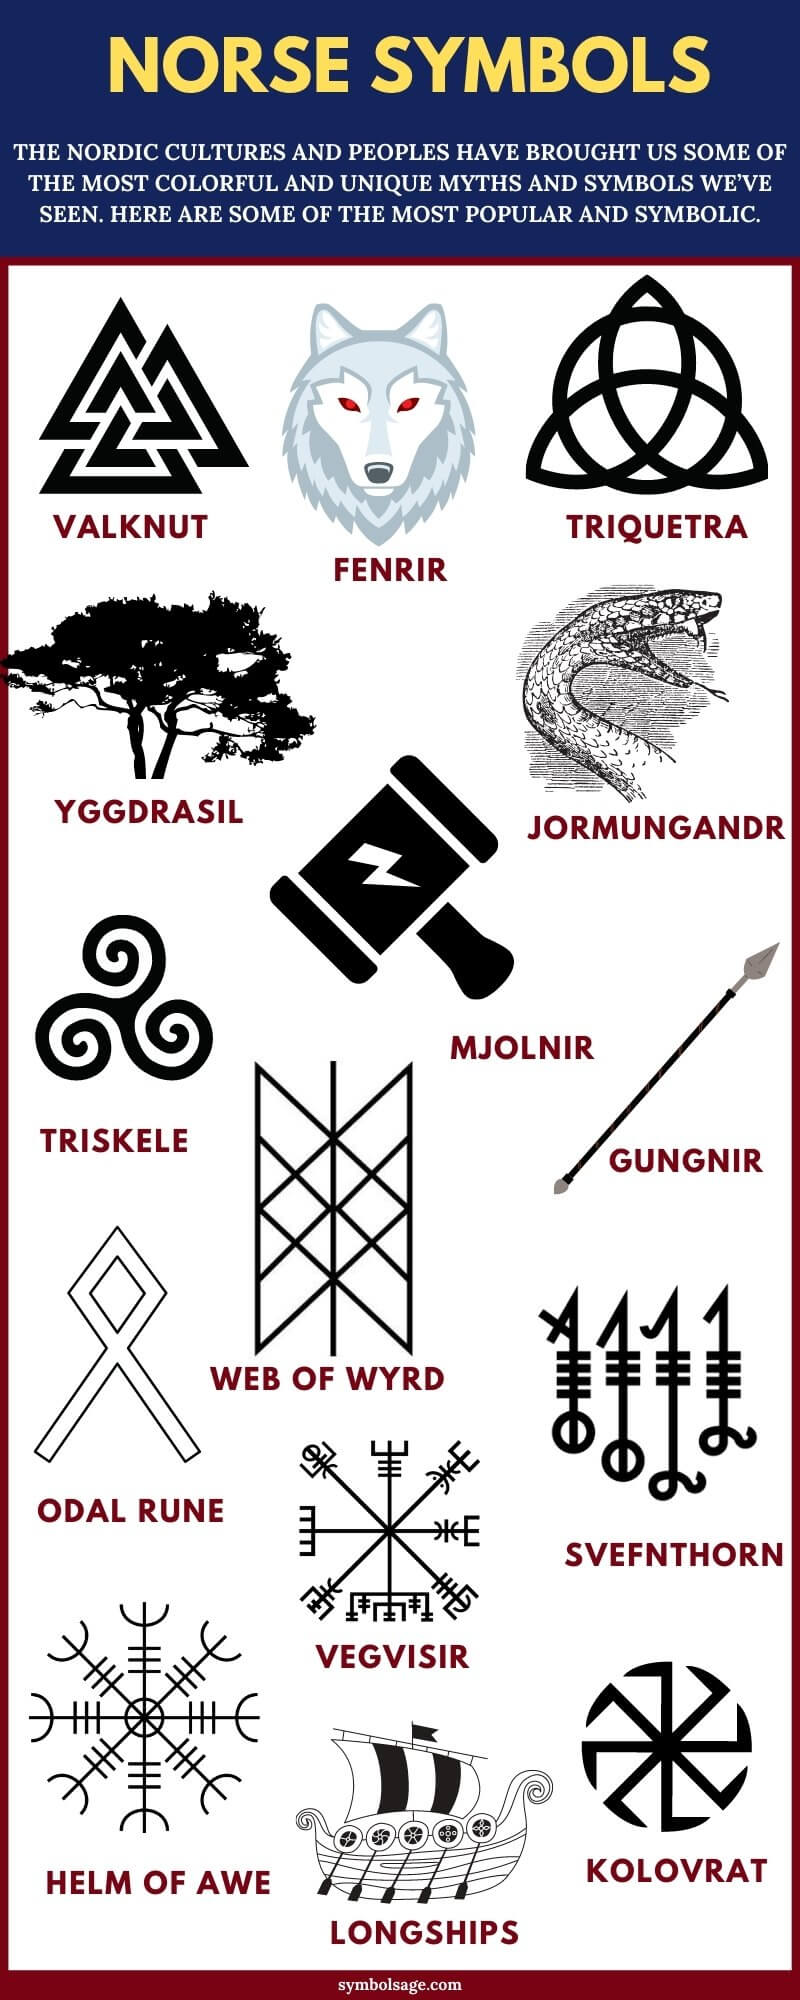 The 5 Most Important Viking Symbols And Their Meanings Viking Symbols ...